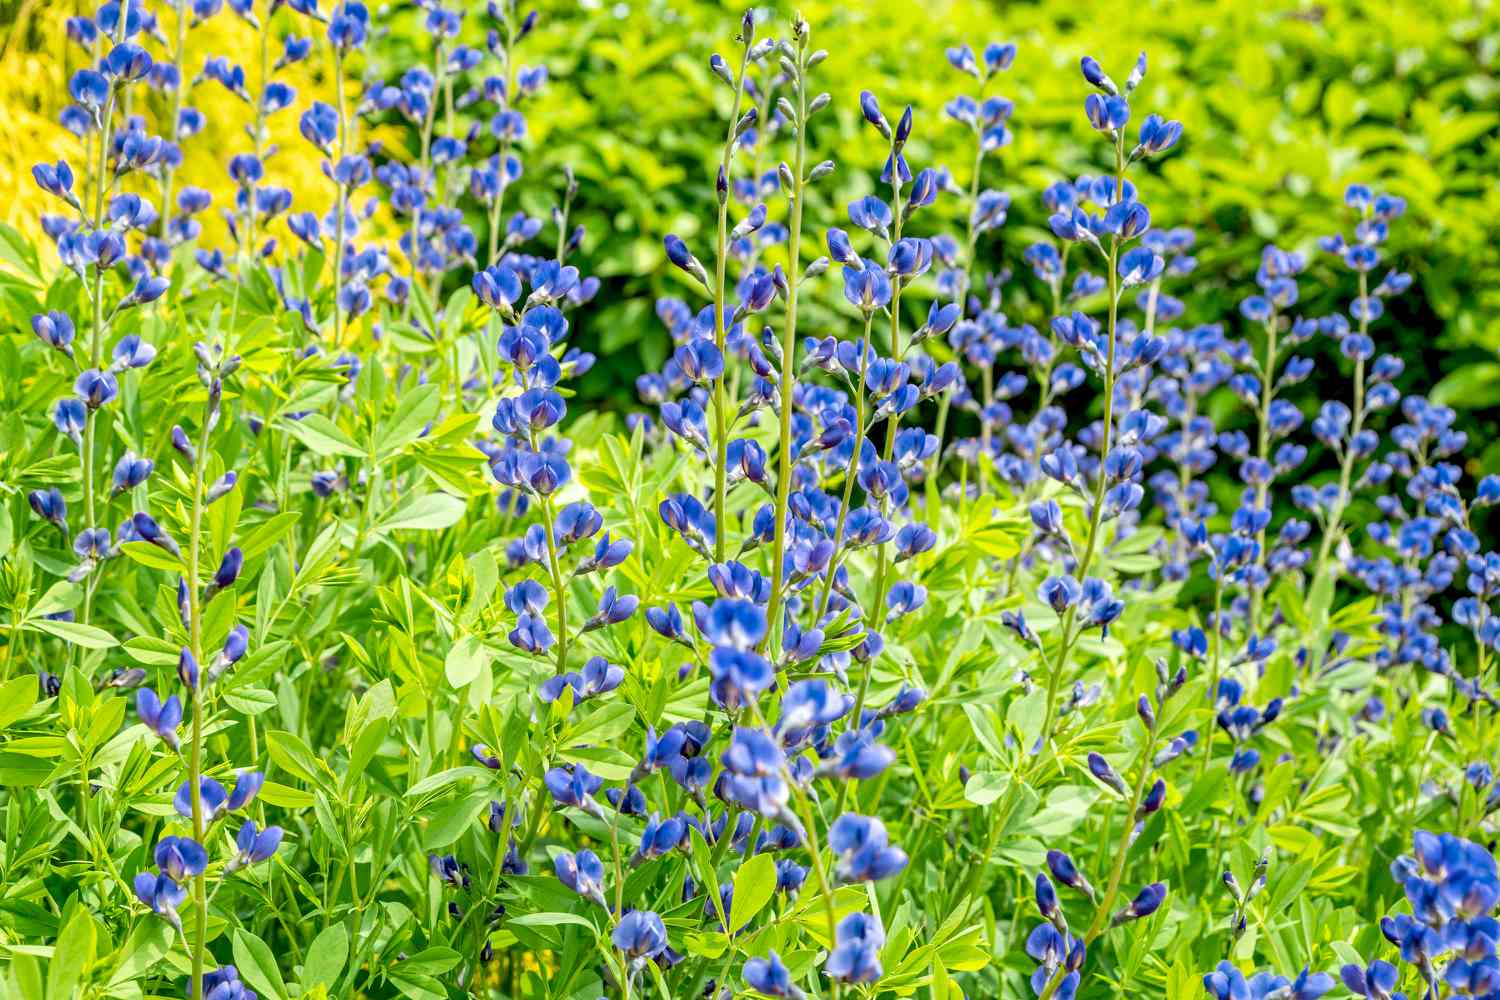 False indigo plant with blue flowers on tall stems in garden